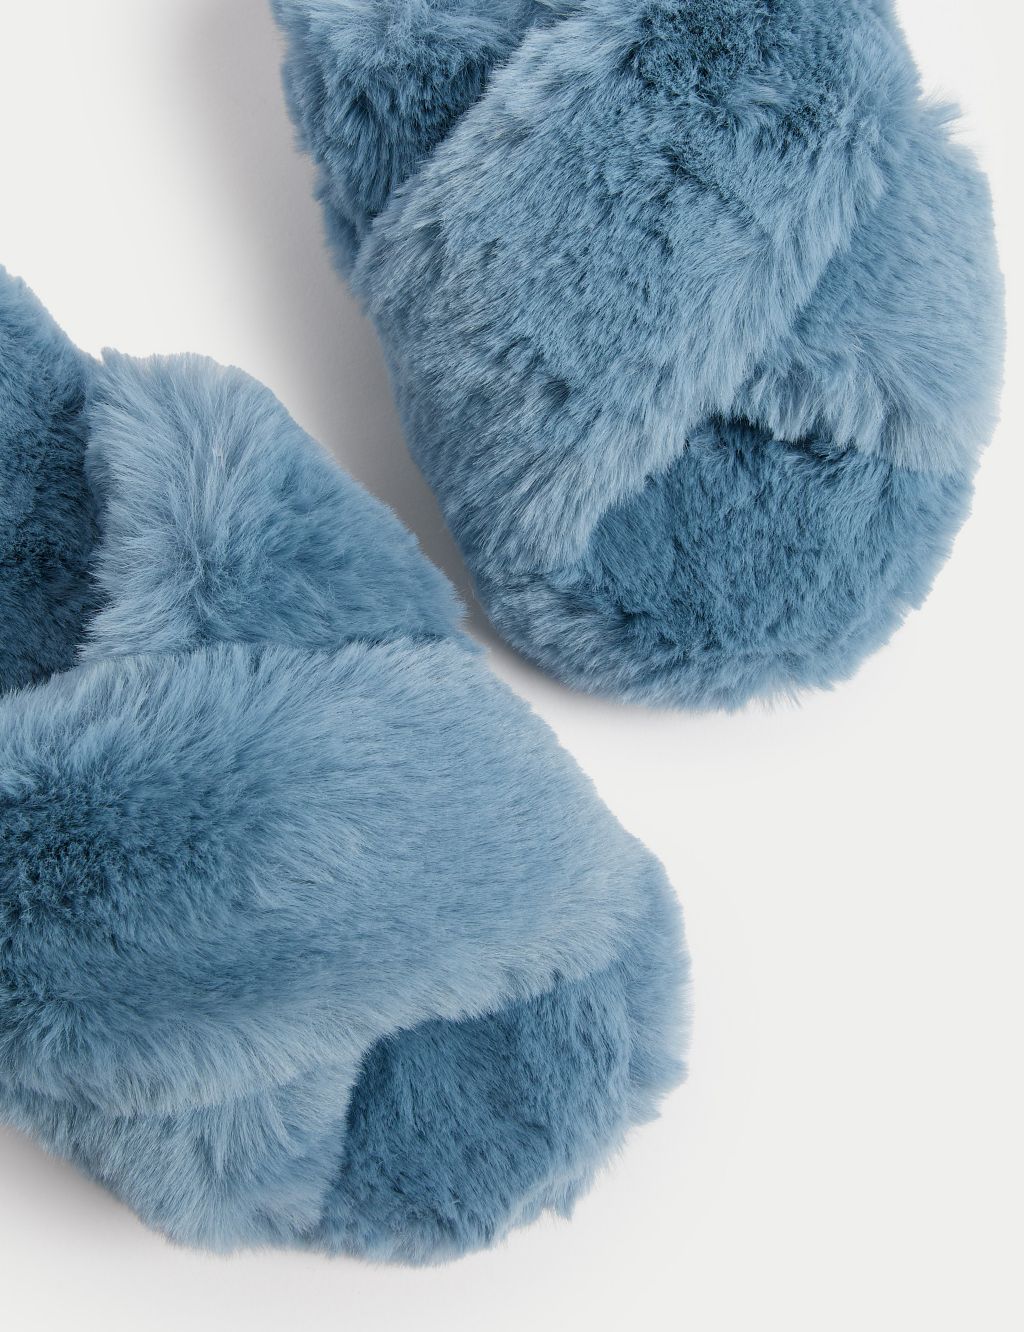 Kids' Faux Fur Slippers (13 Small - 6 Large) image 3